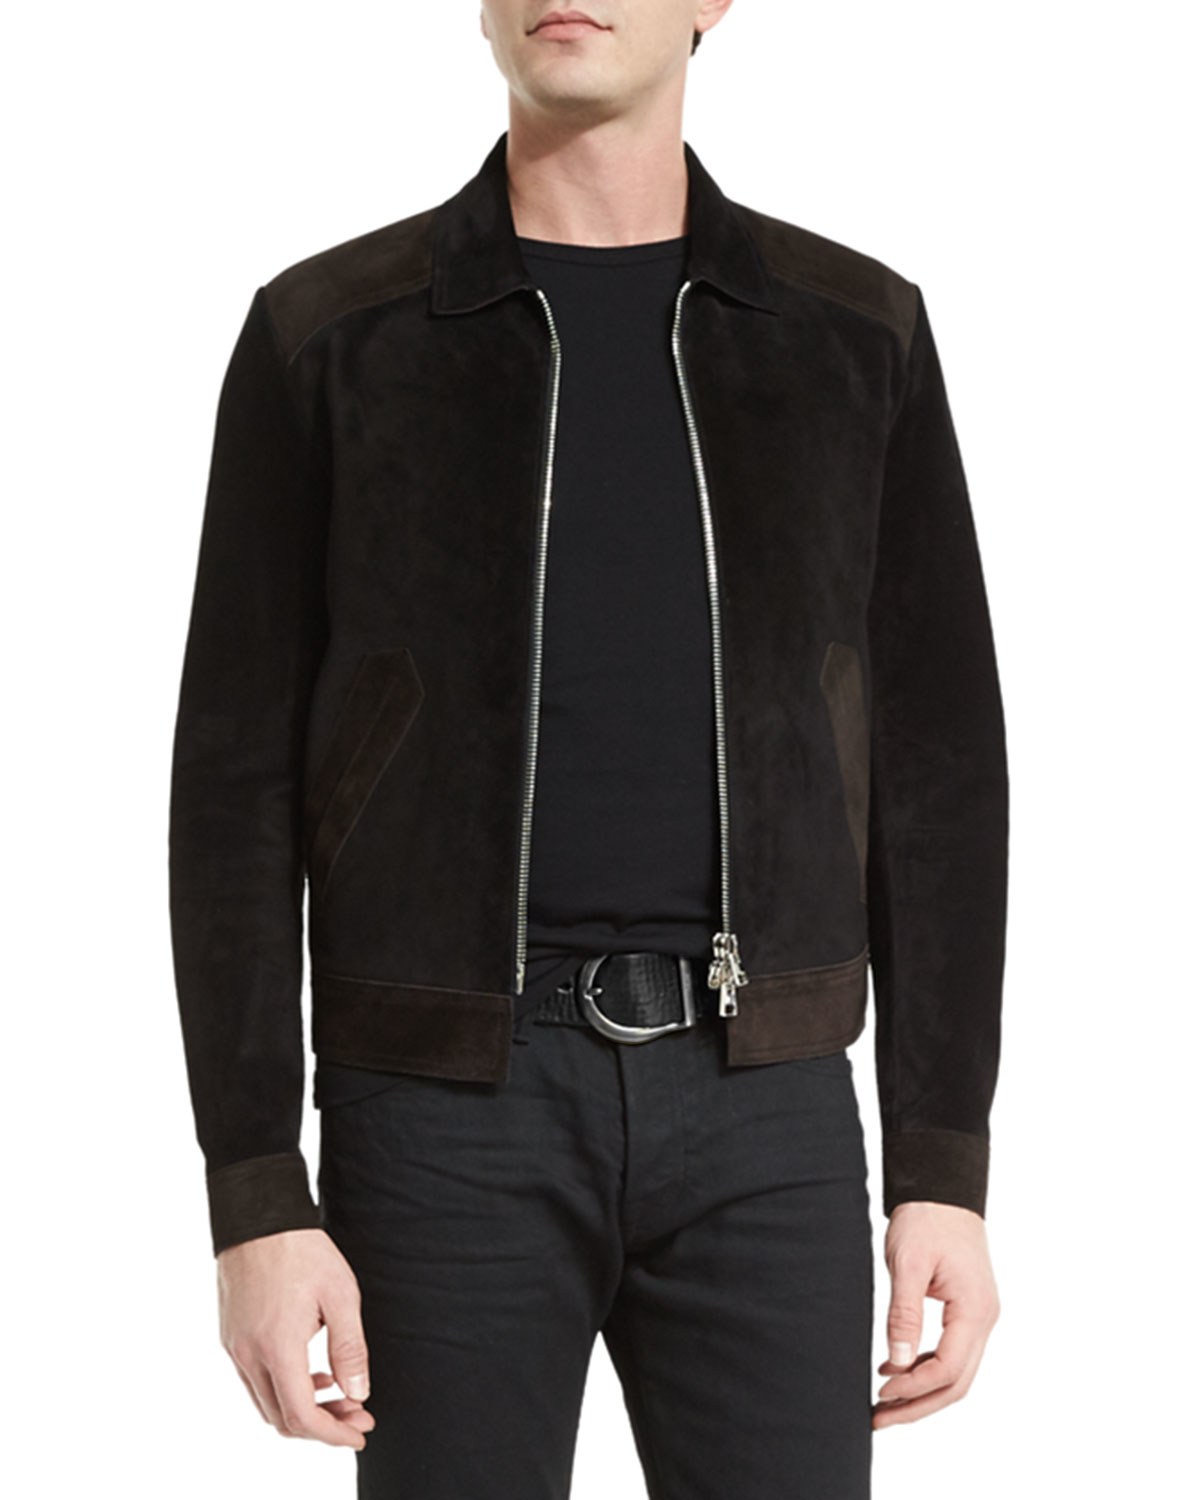 Lyst - Tom Ford Two-tone Aged Suede Bomber Jacket in Black for Men